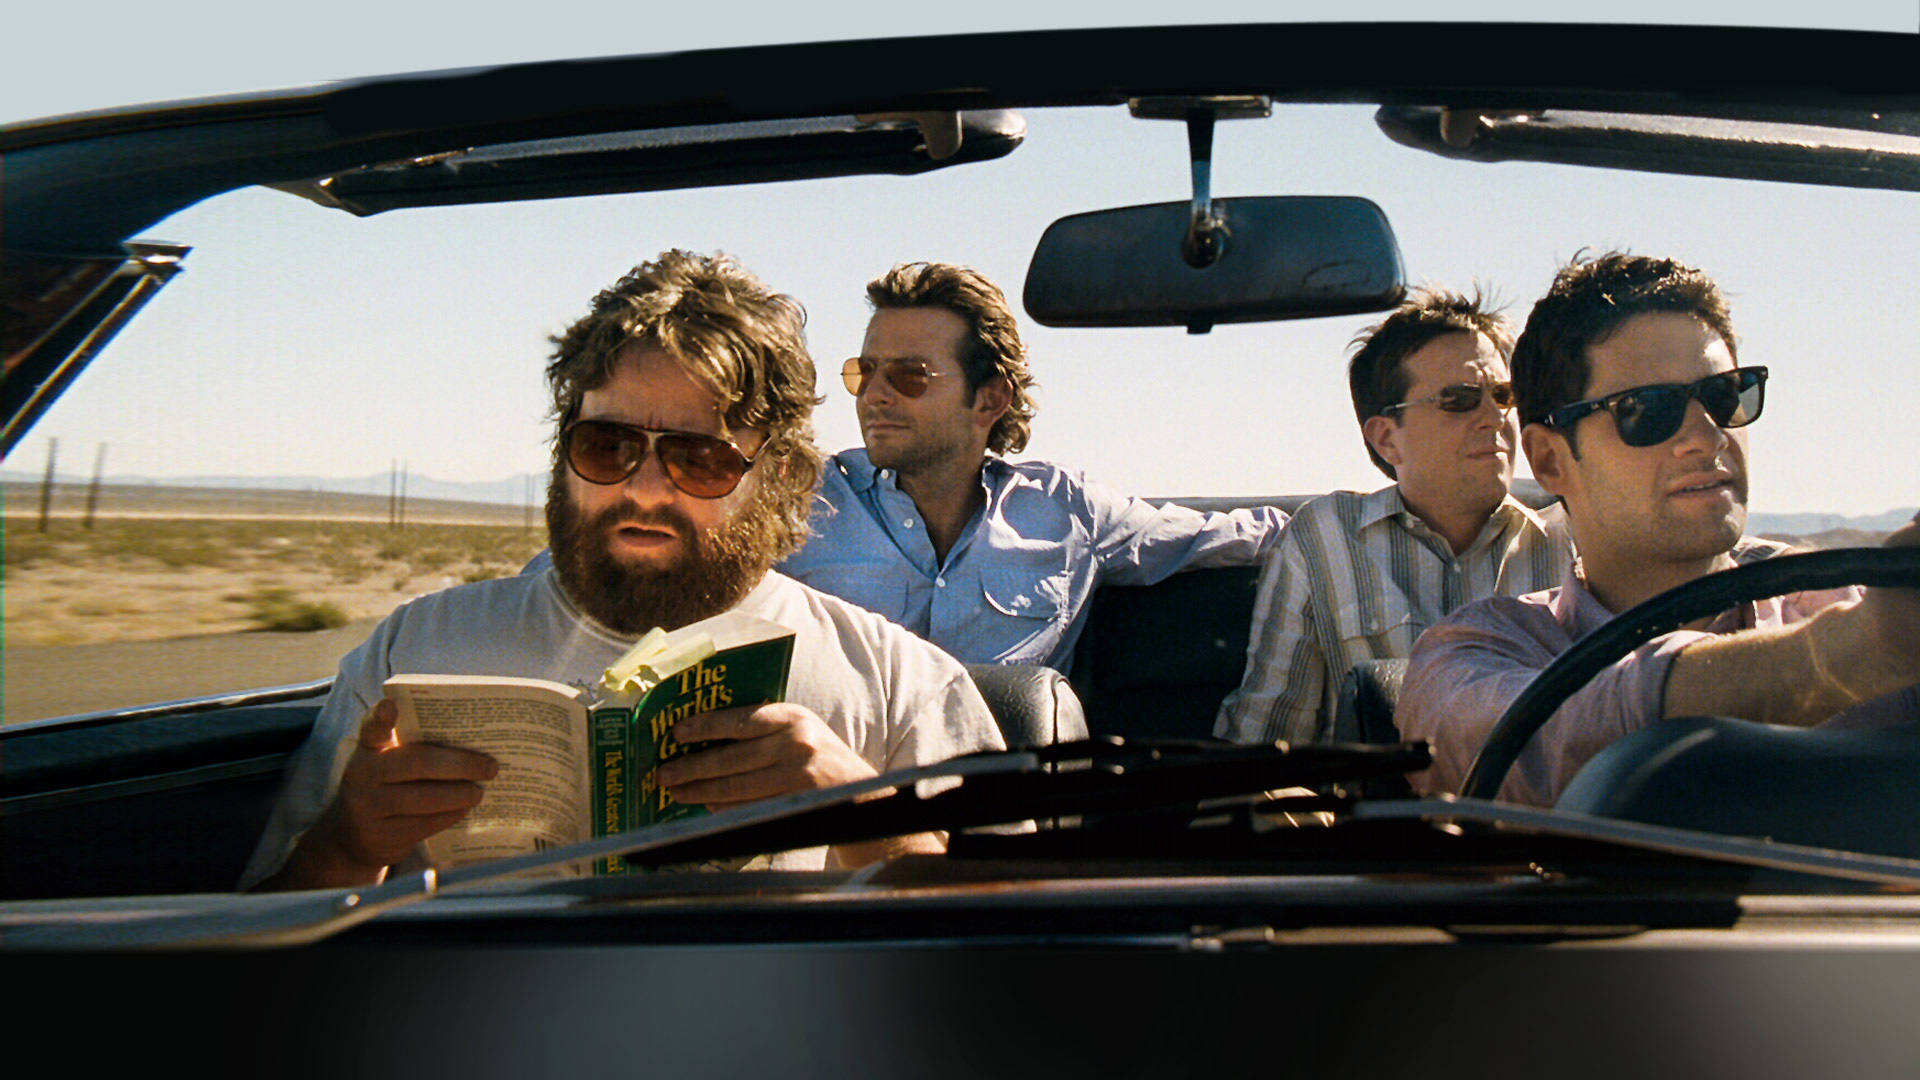 The Hangover Backgrounds, Compatible - PC, Mobile, Gadgets| 1920x1080 px